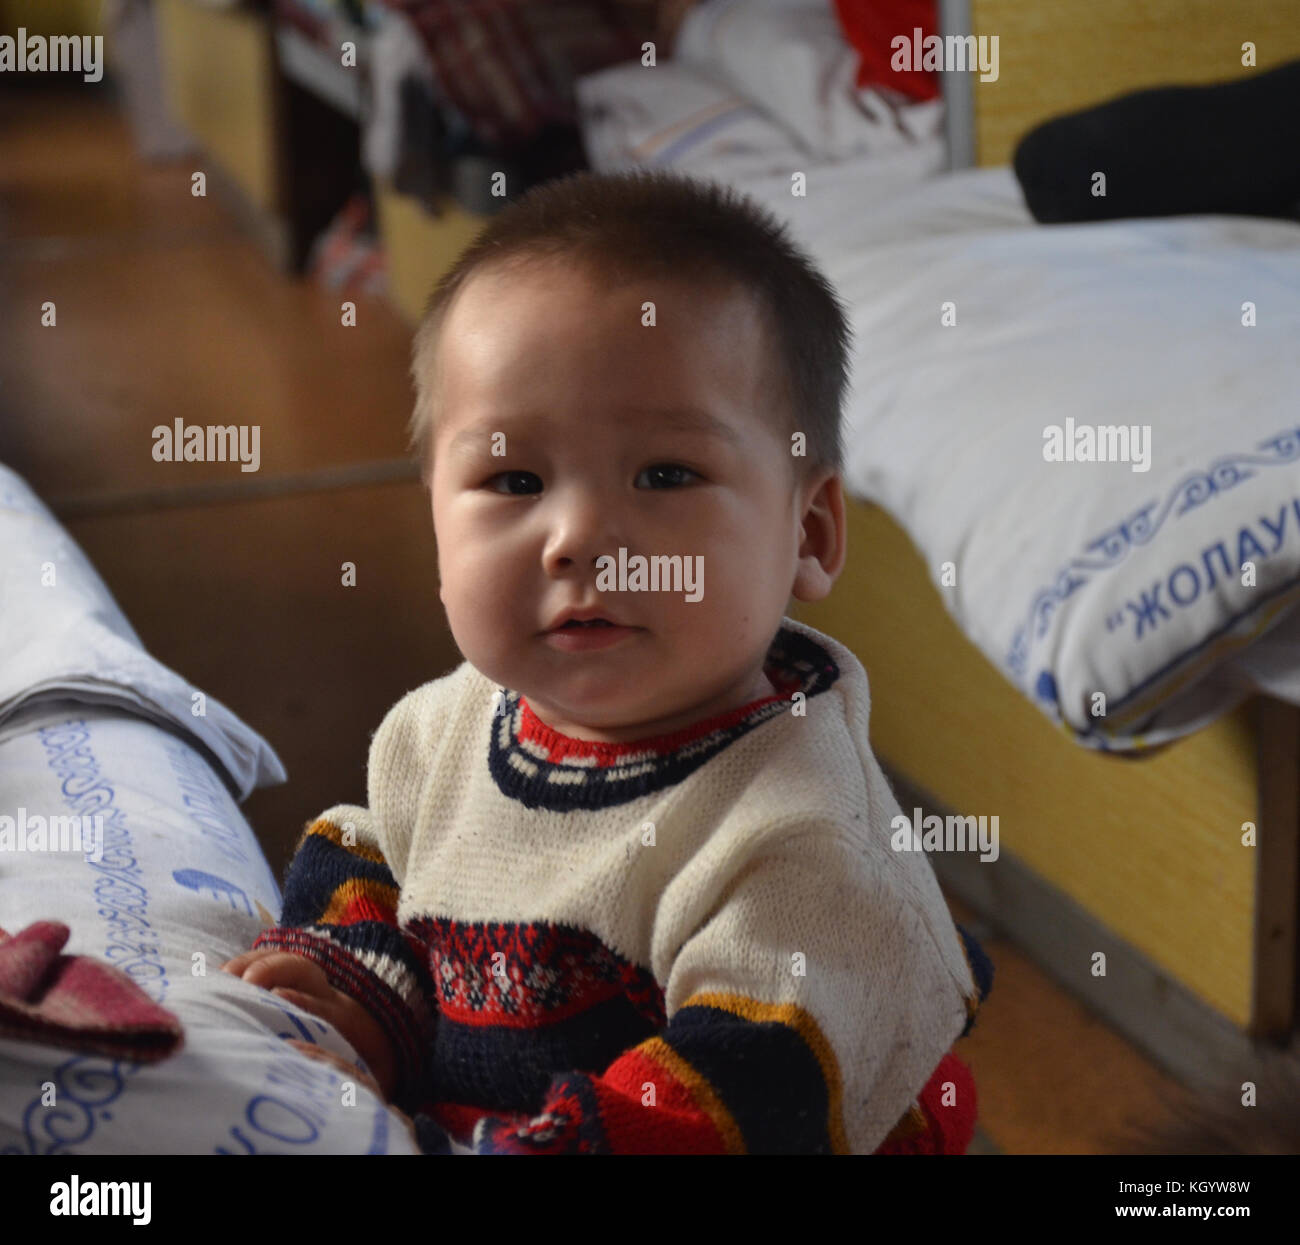 little cute Kazakh baby boy with Asian with cockeyed eyes staring to someone with open mouth wearing a winter wool sweater. Stock Photo